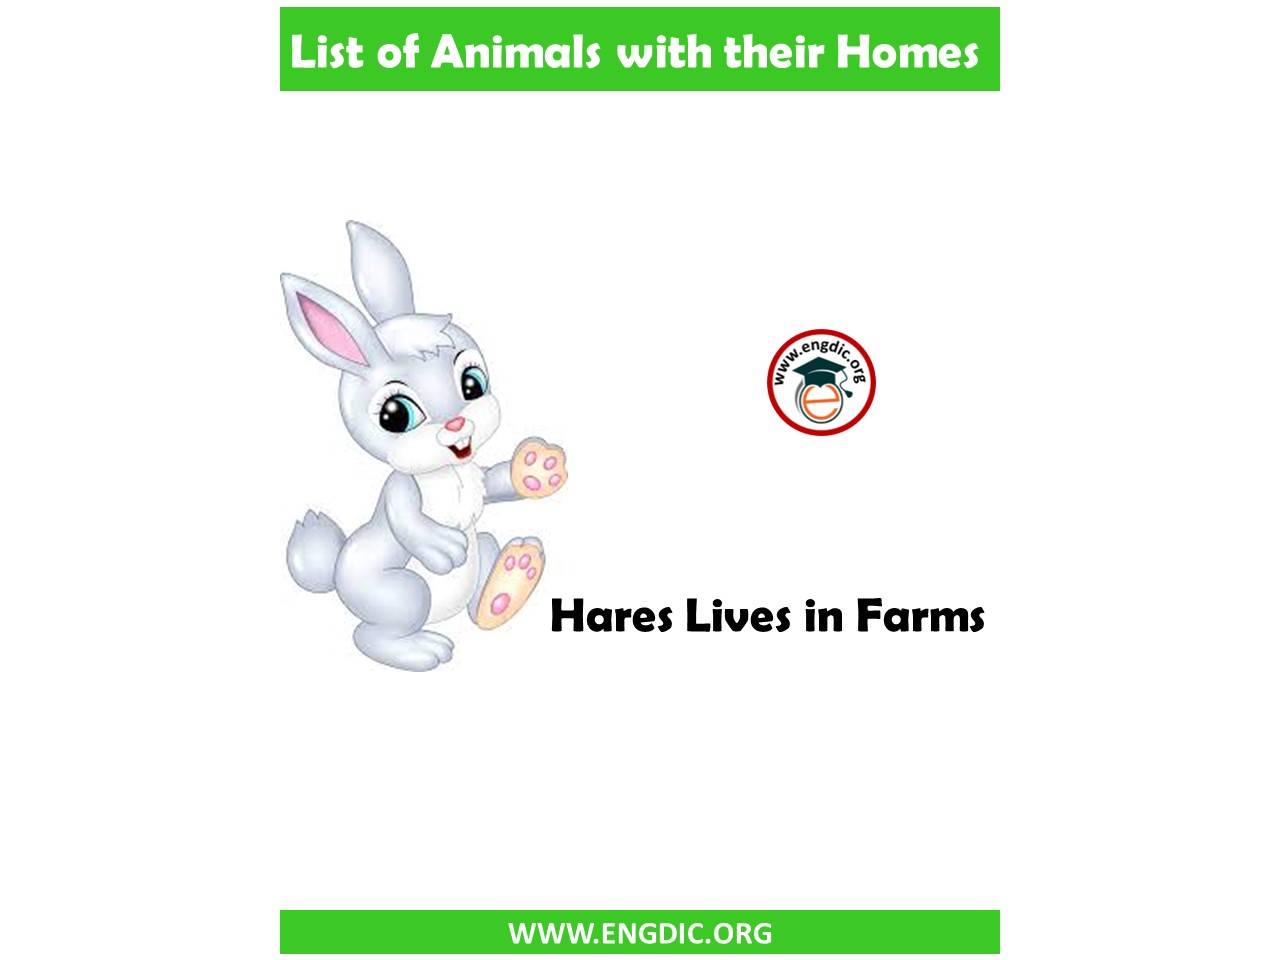 animal homes with images